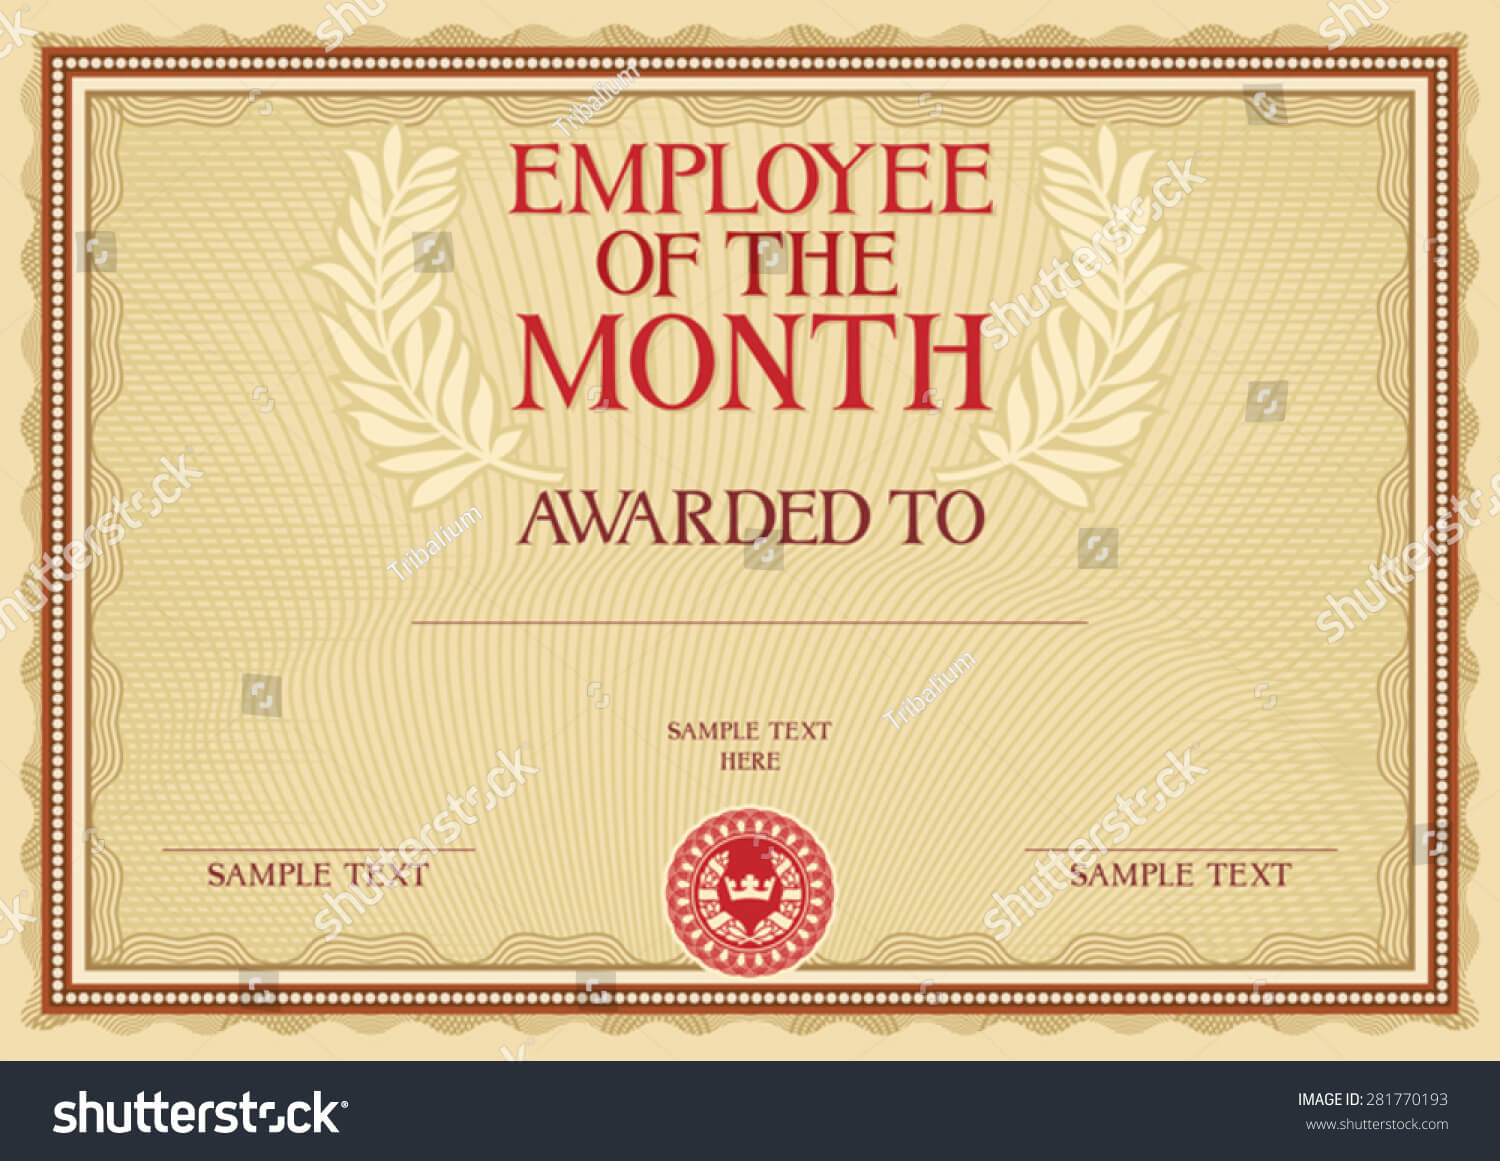 Employee Month Certificate Template Stock Vector (Royalty For Manager Of The Month Certificate Template